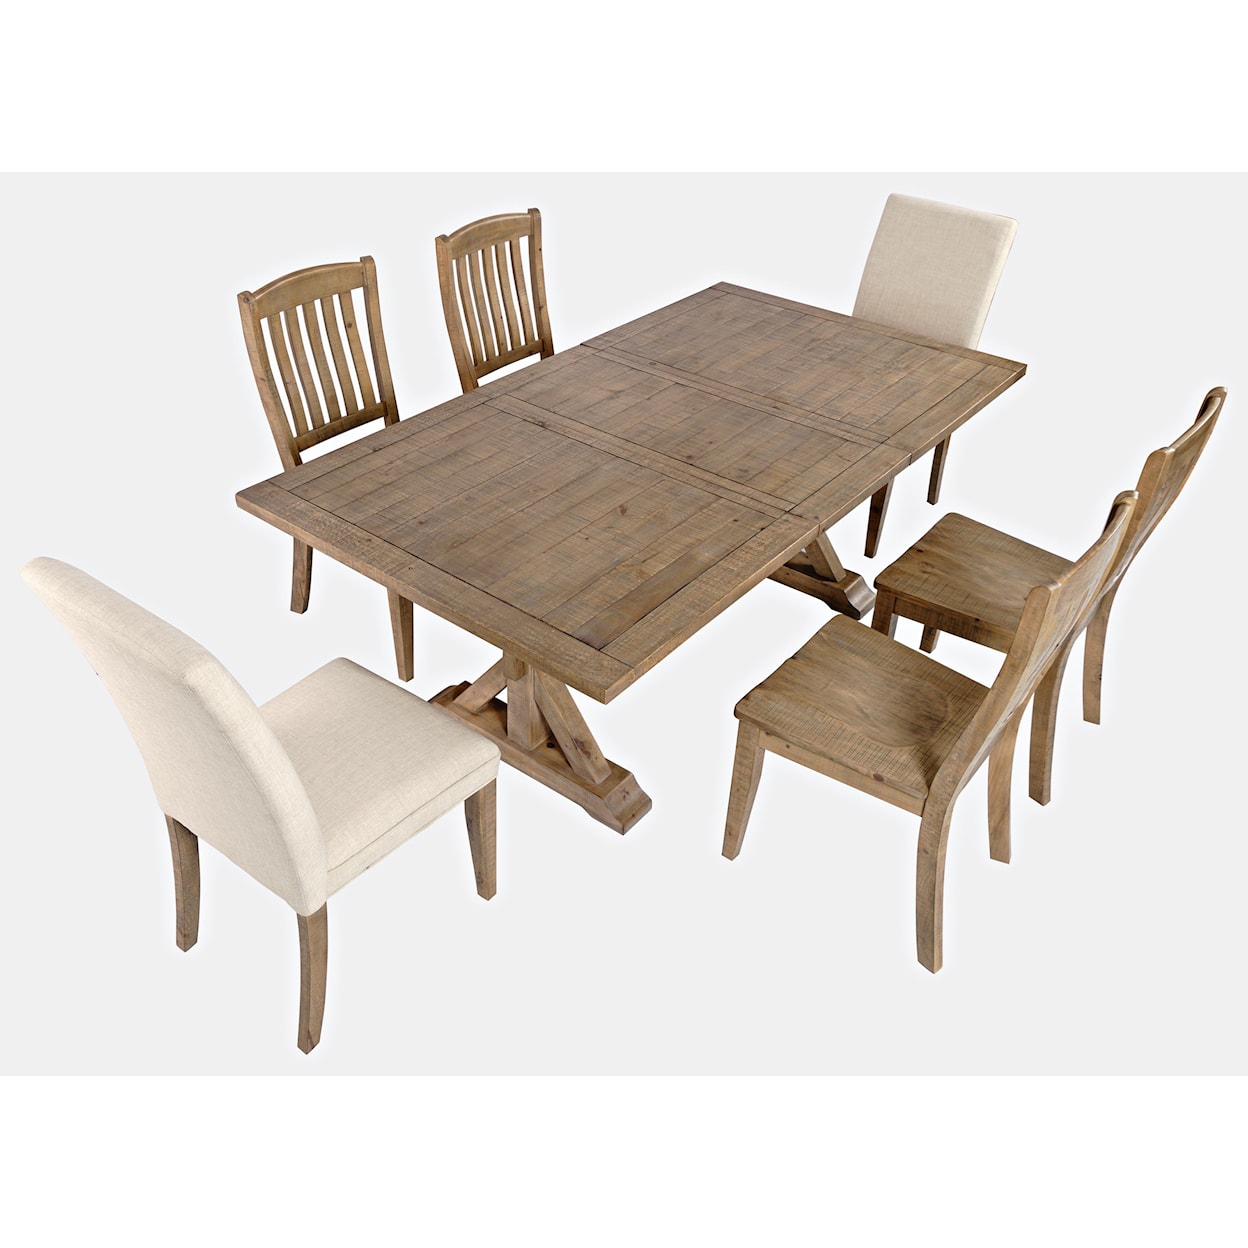 Jofran Carlyle Crossing 7-Piece Dining Table and Chair Set